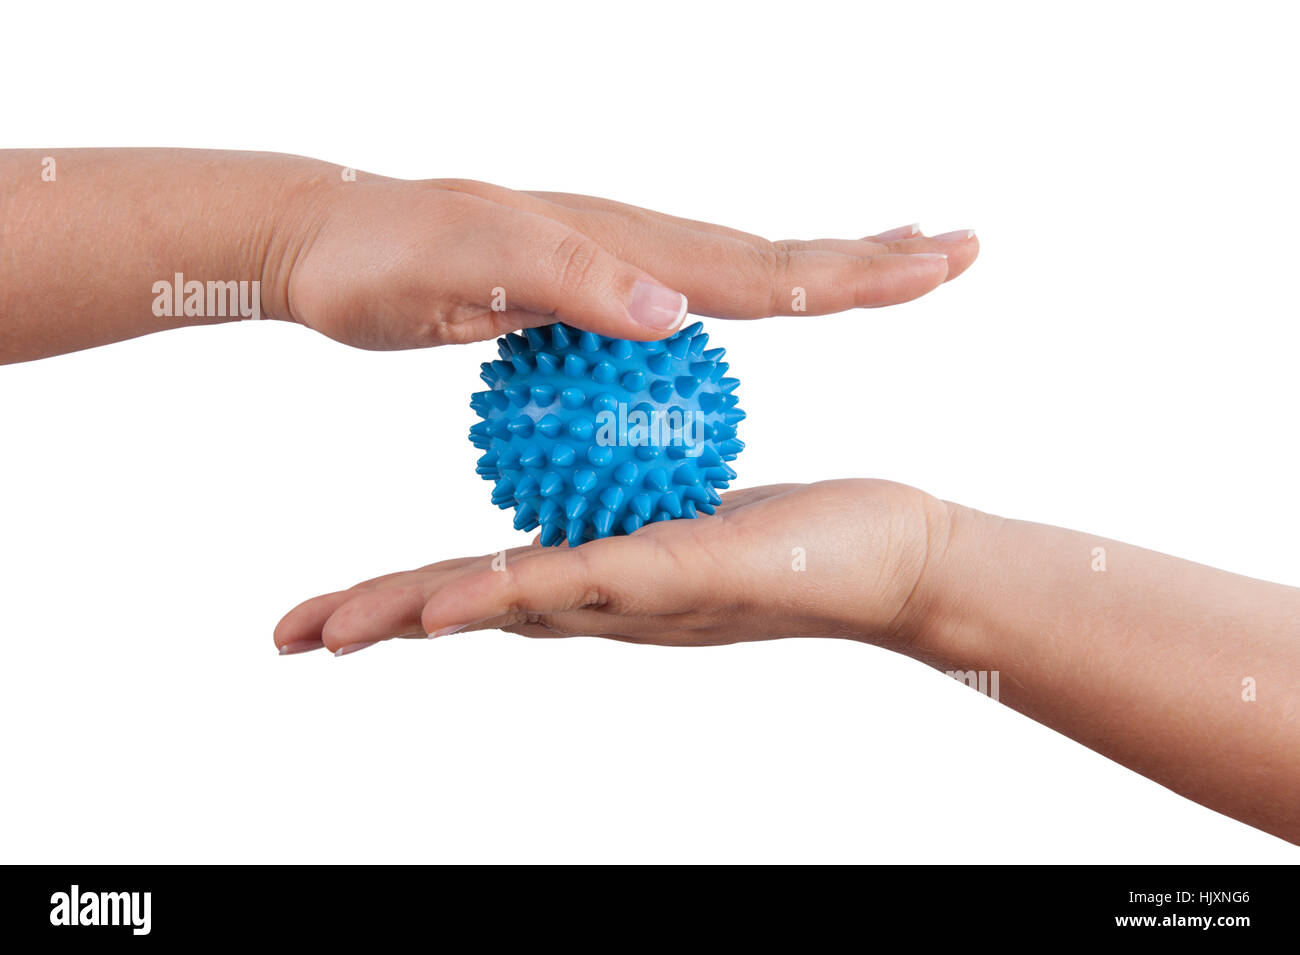 Woman's hands with Spiny plastic blue massage ball isolated on white background Stock Photo